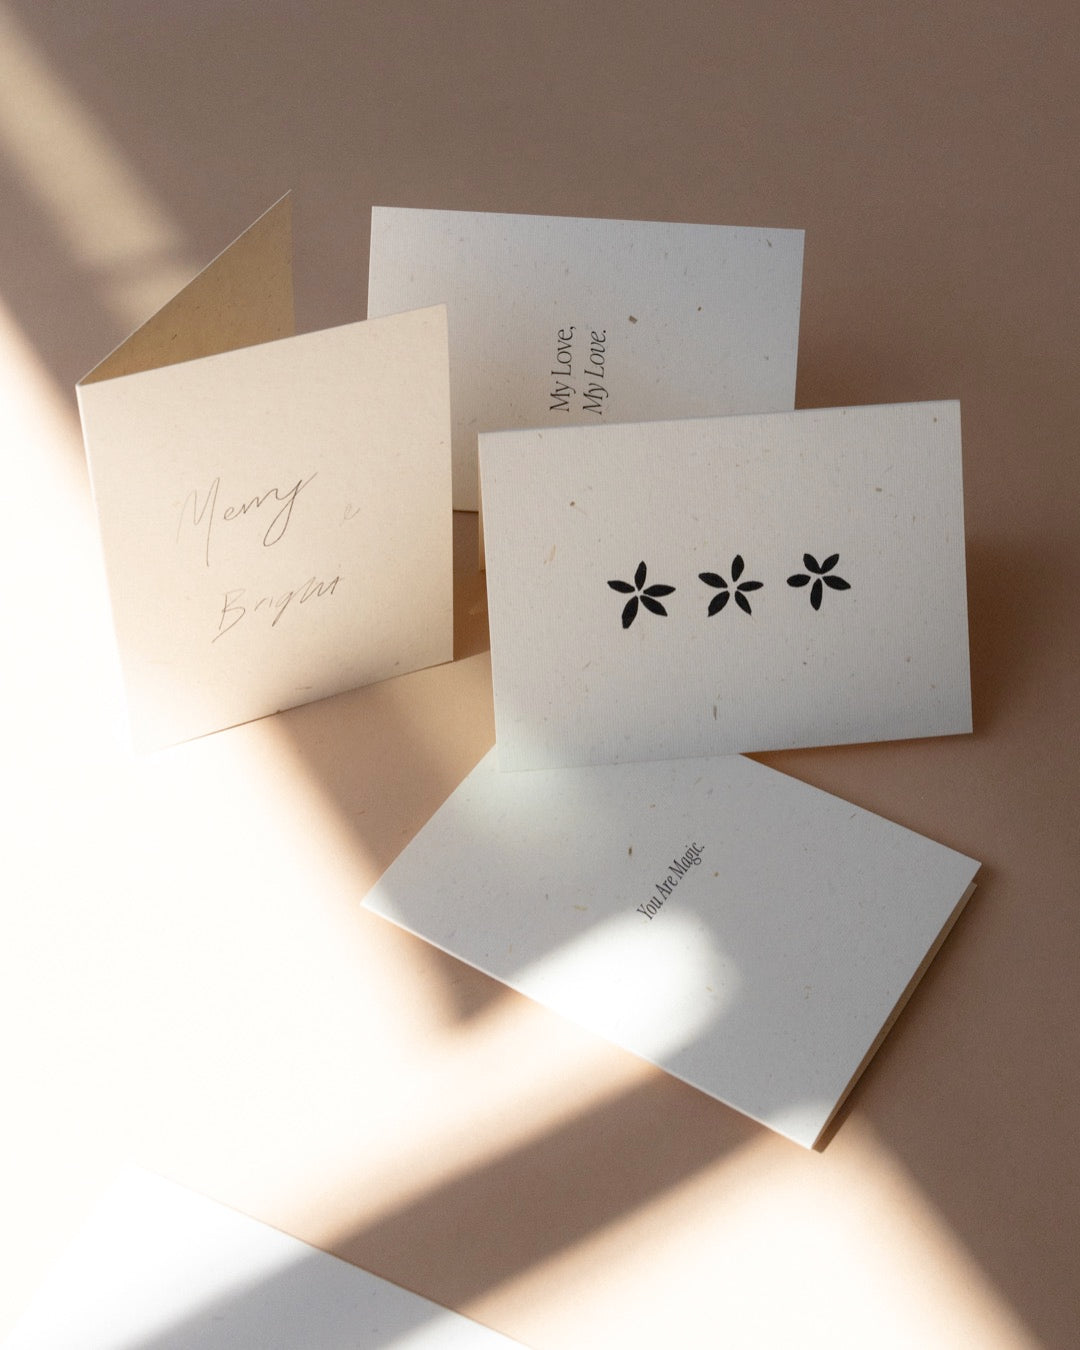 Merry & Bright Card Gift Cards by Prae - Prae Store